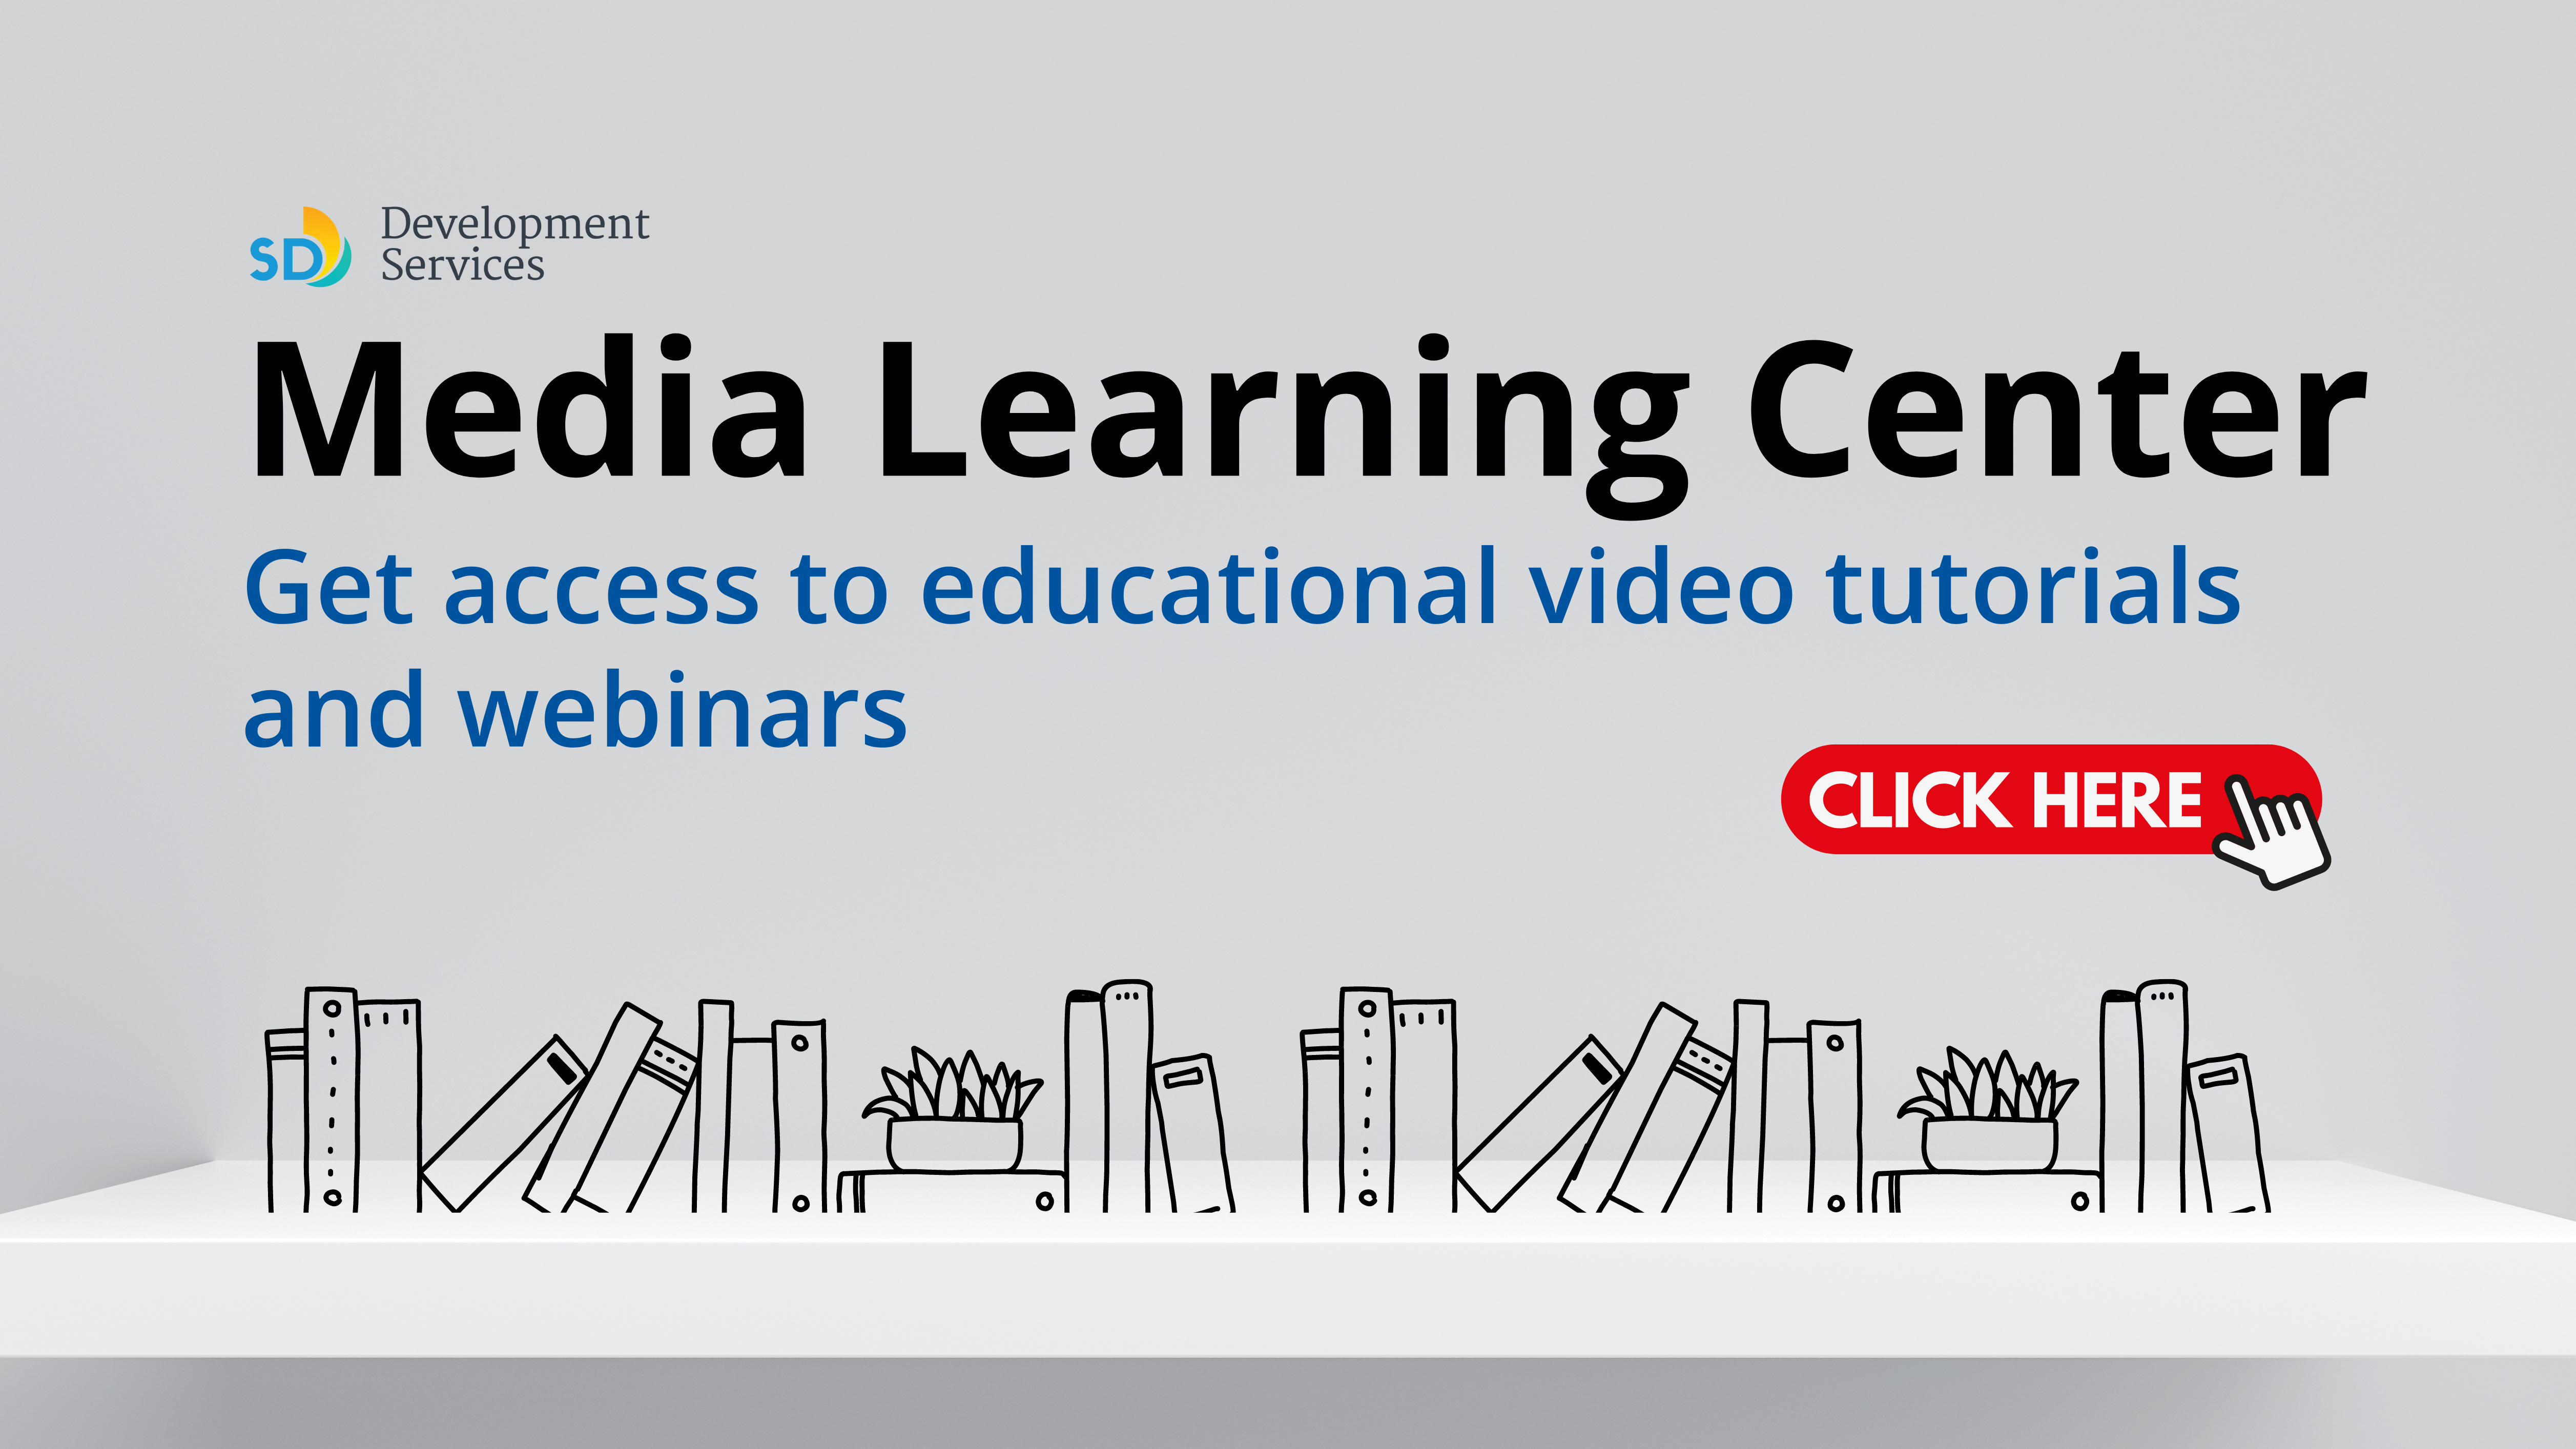 DSD Media Learning Center: Get Access to educational video tutorials and webinars